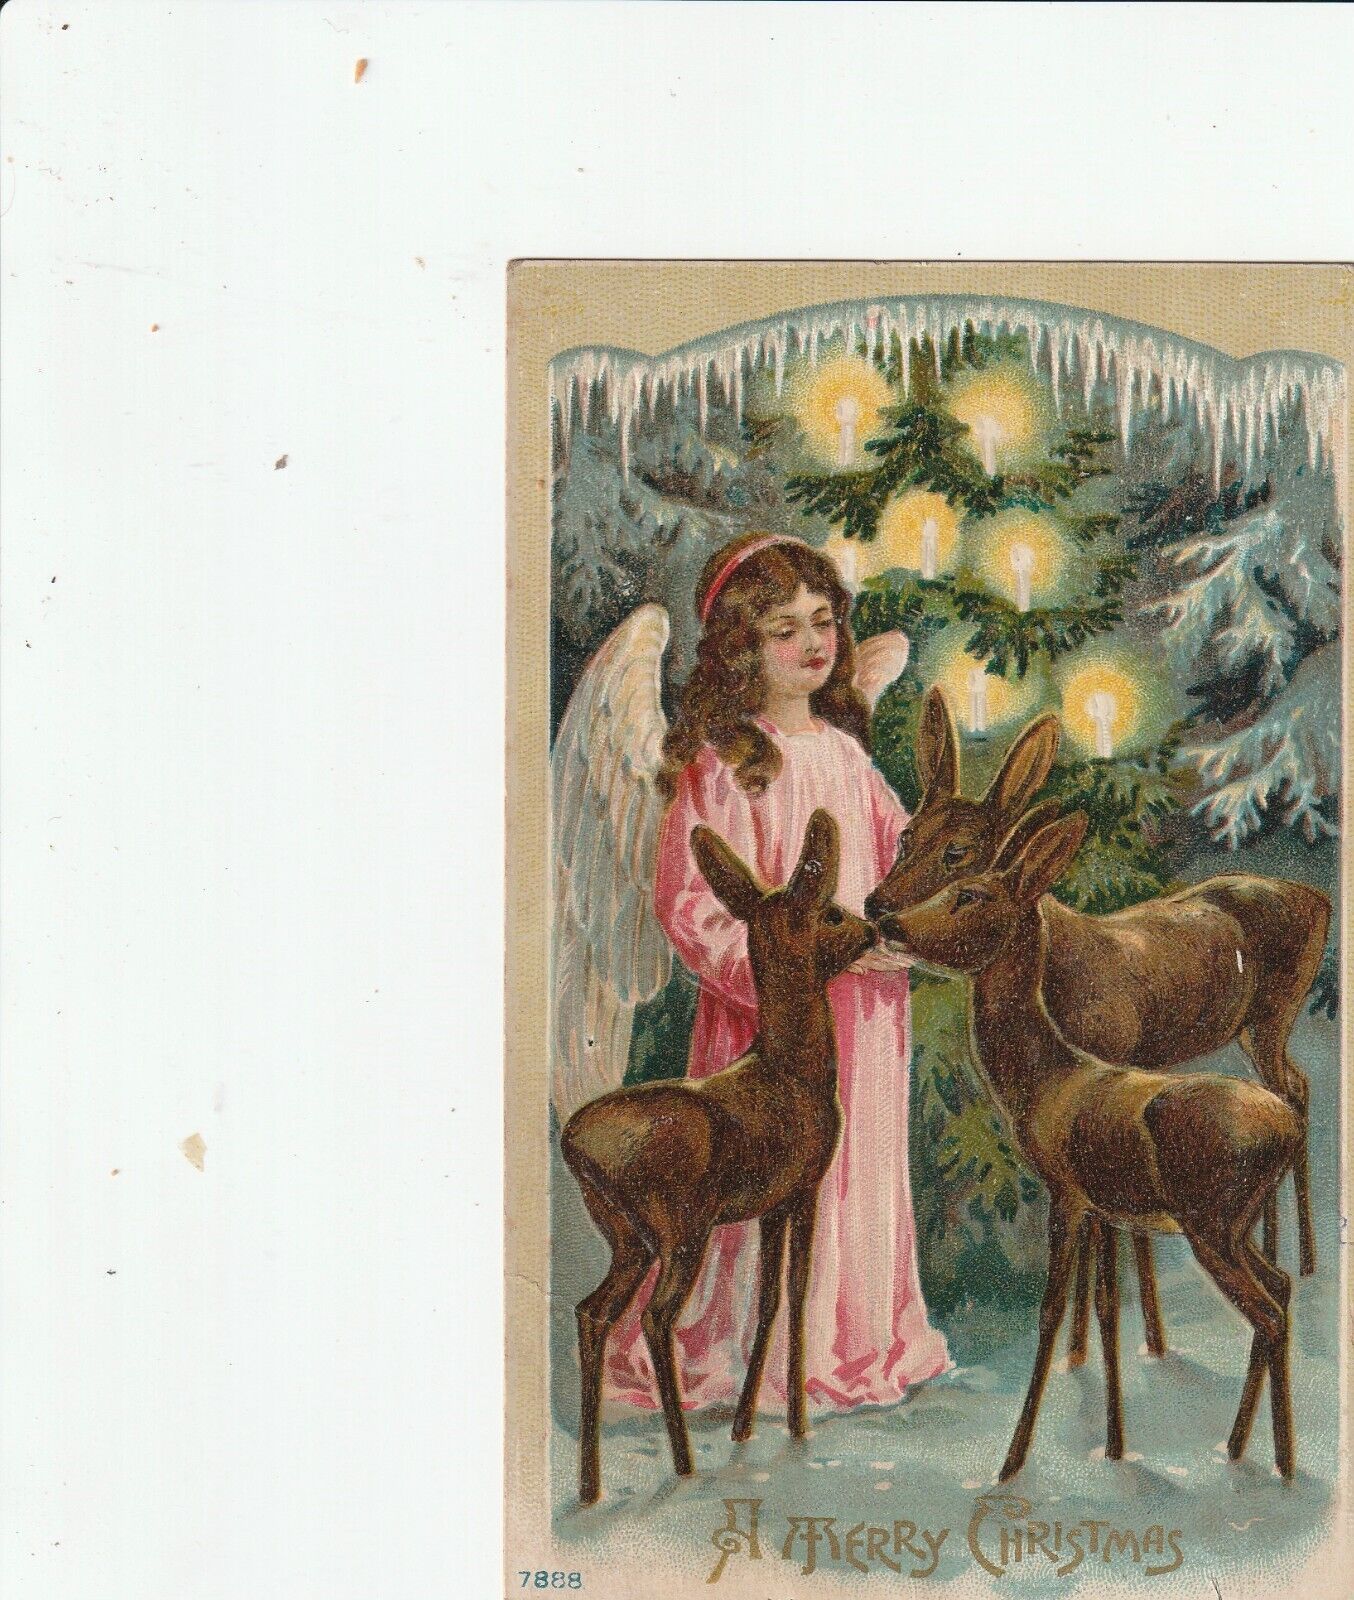 A Merry Christmas Embossed Angel & Deer, Postmarked 1912 at BOYDS, Maryland